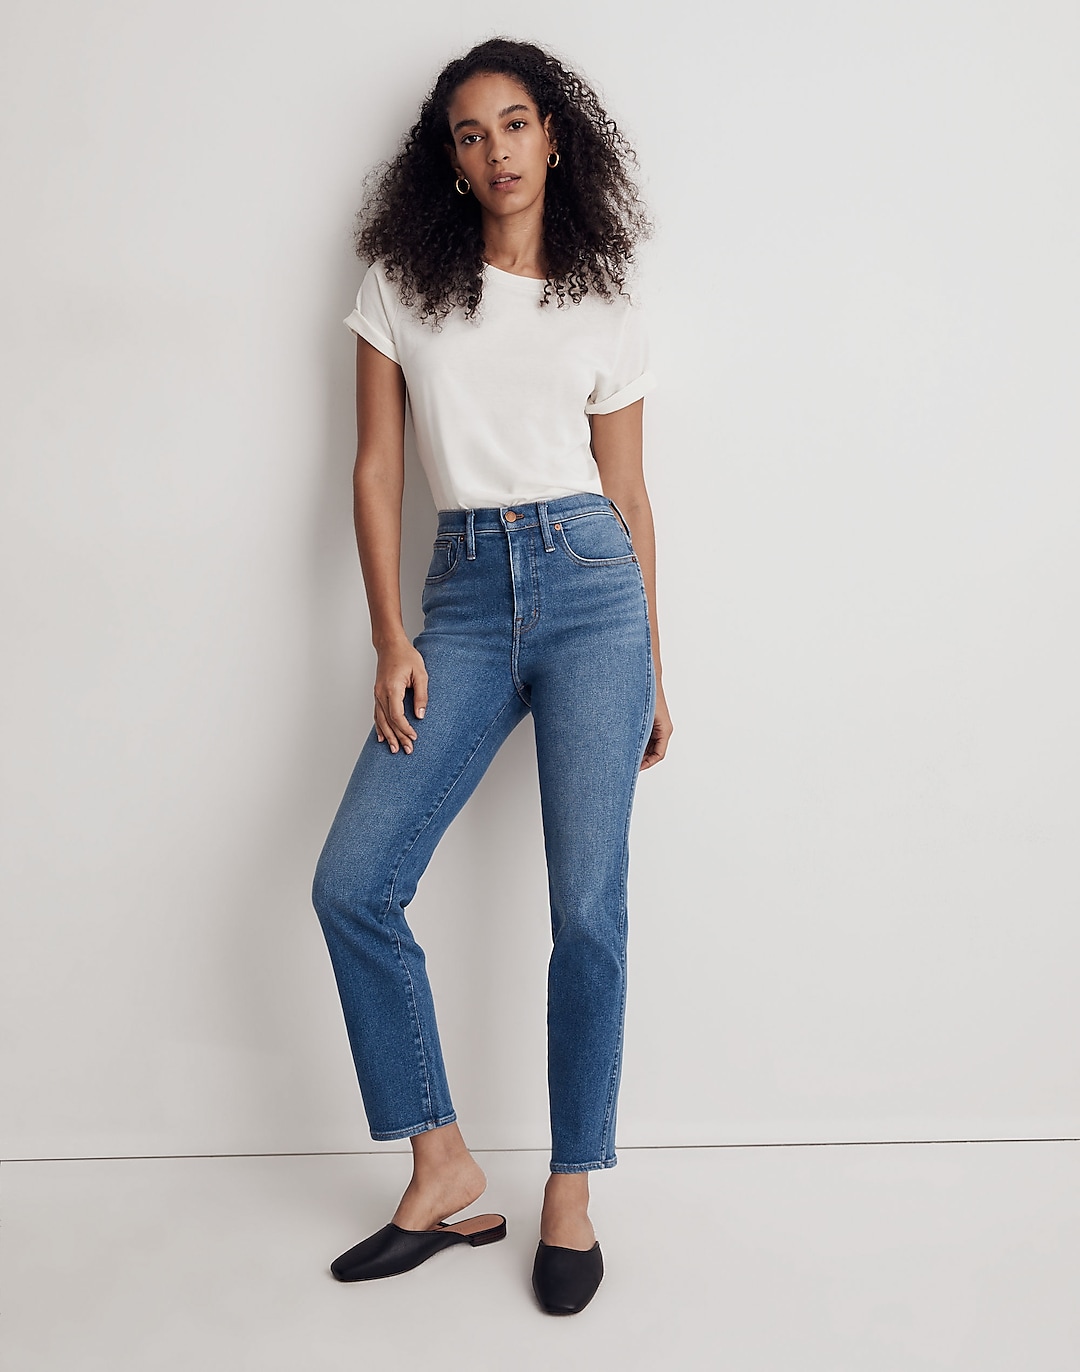 Stovepipe Jeans in Leaside Wash | Madewell